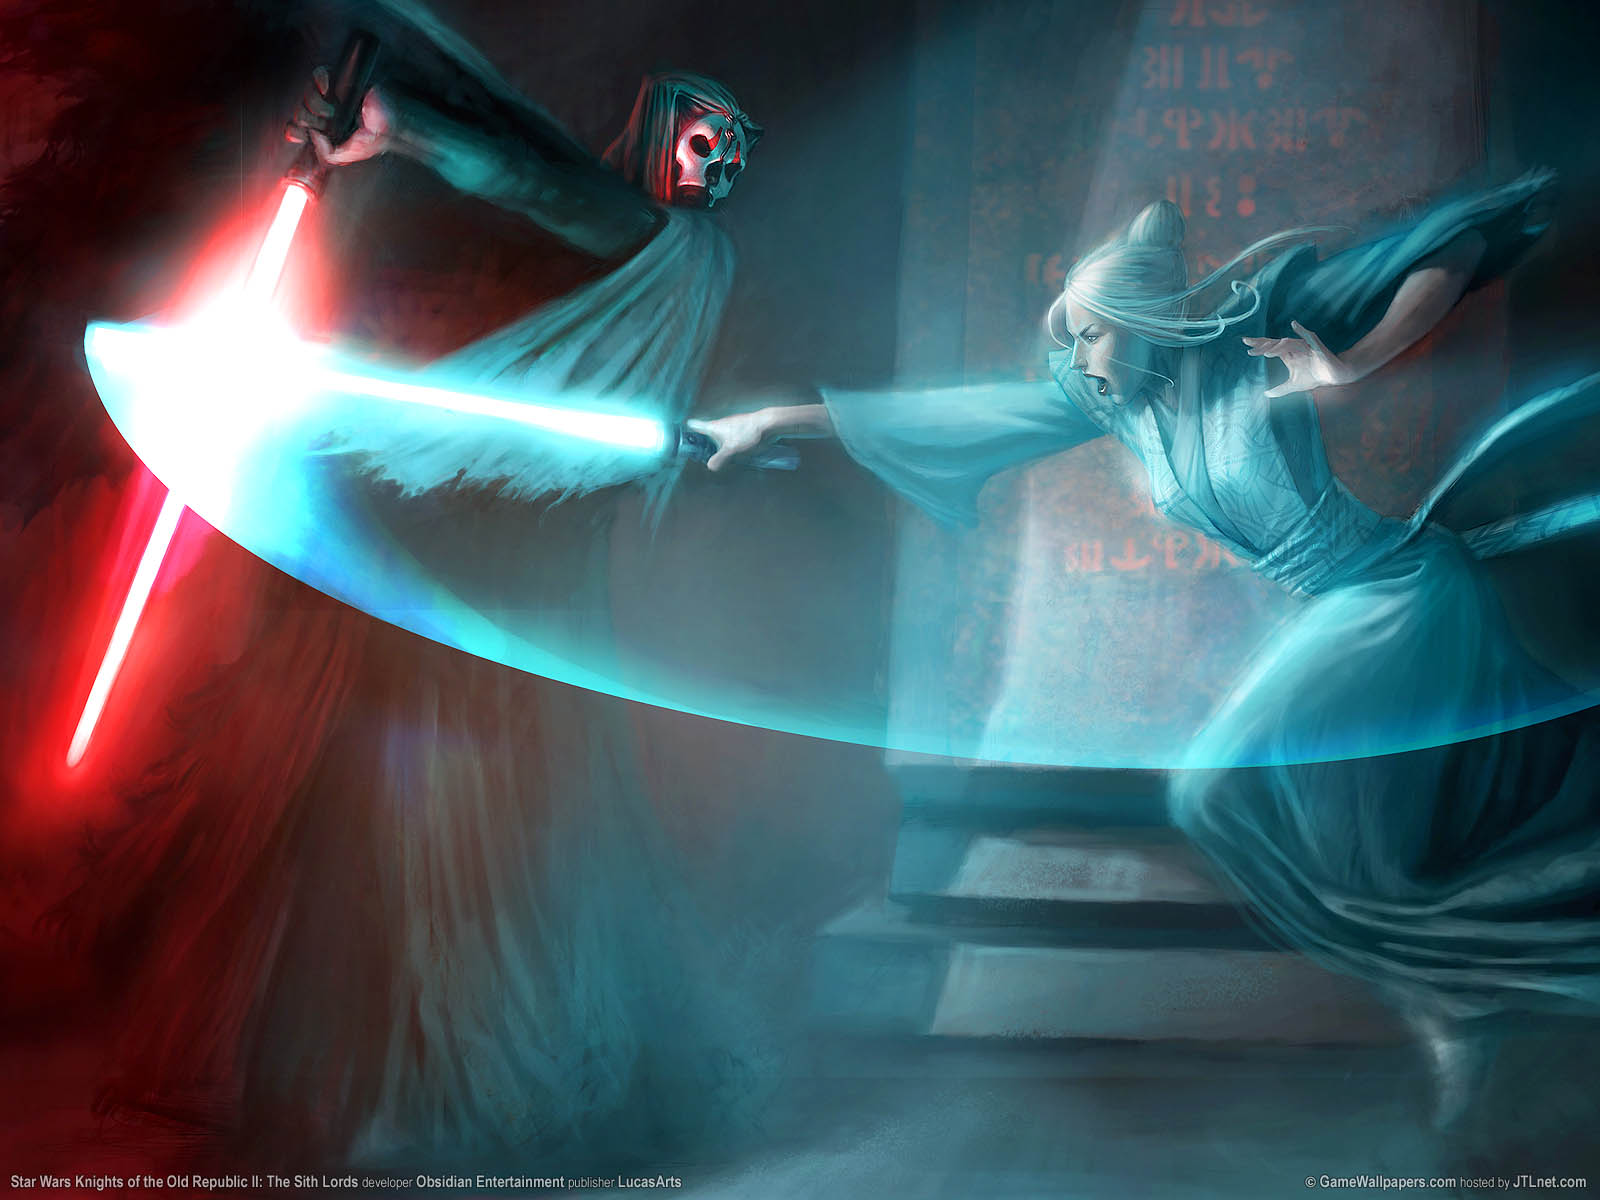 Star Wars%3A Knights of the Old Republic 2 wallpaper 02 1600x1200